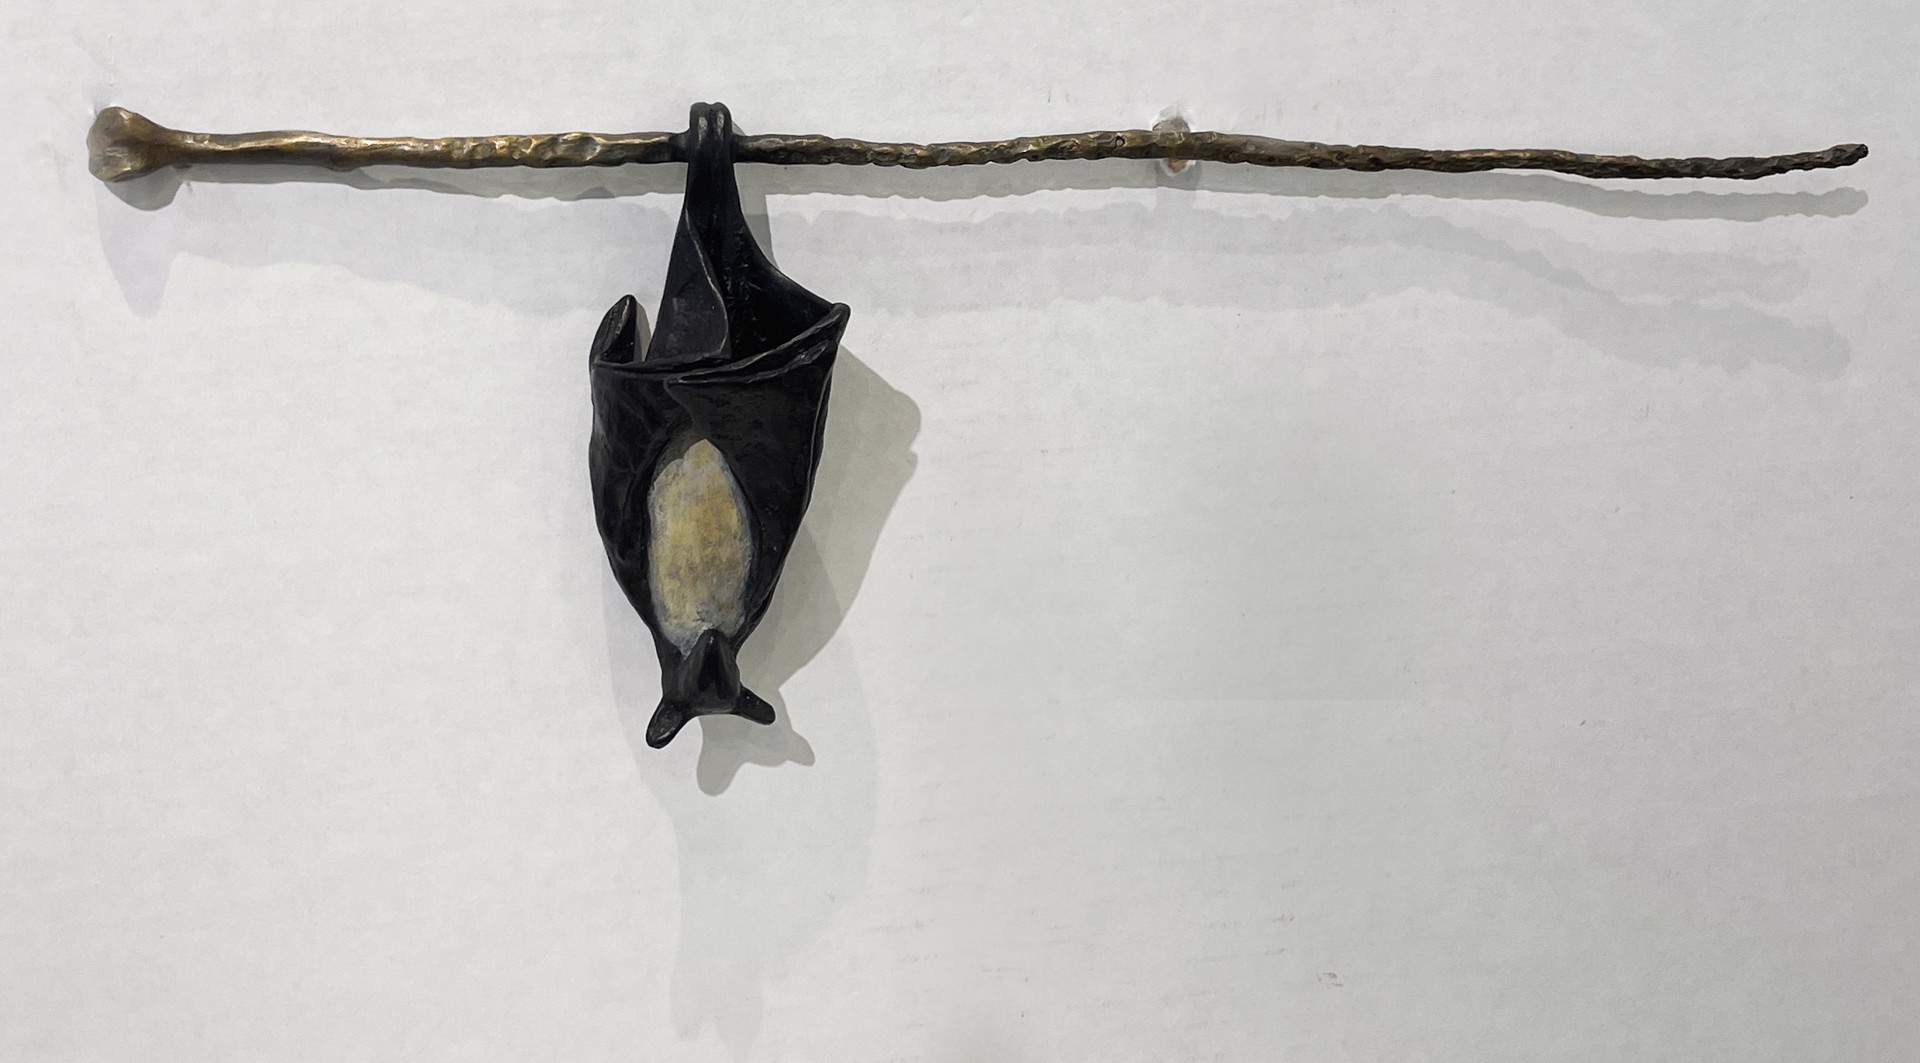 1 Temple Bat on a Branch, hangs from the left by Copper Tritscheller